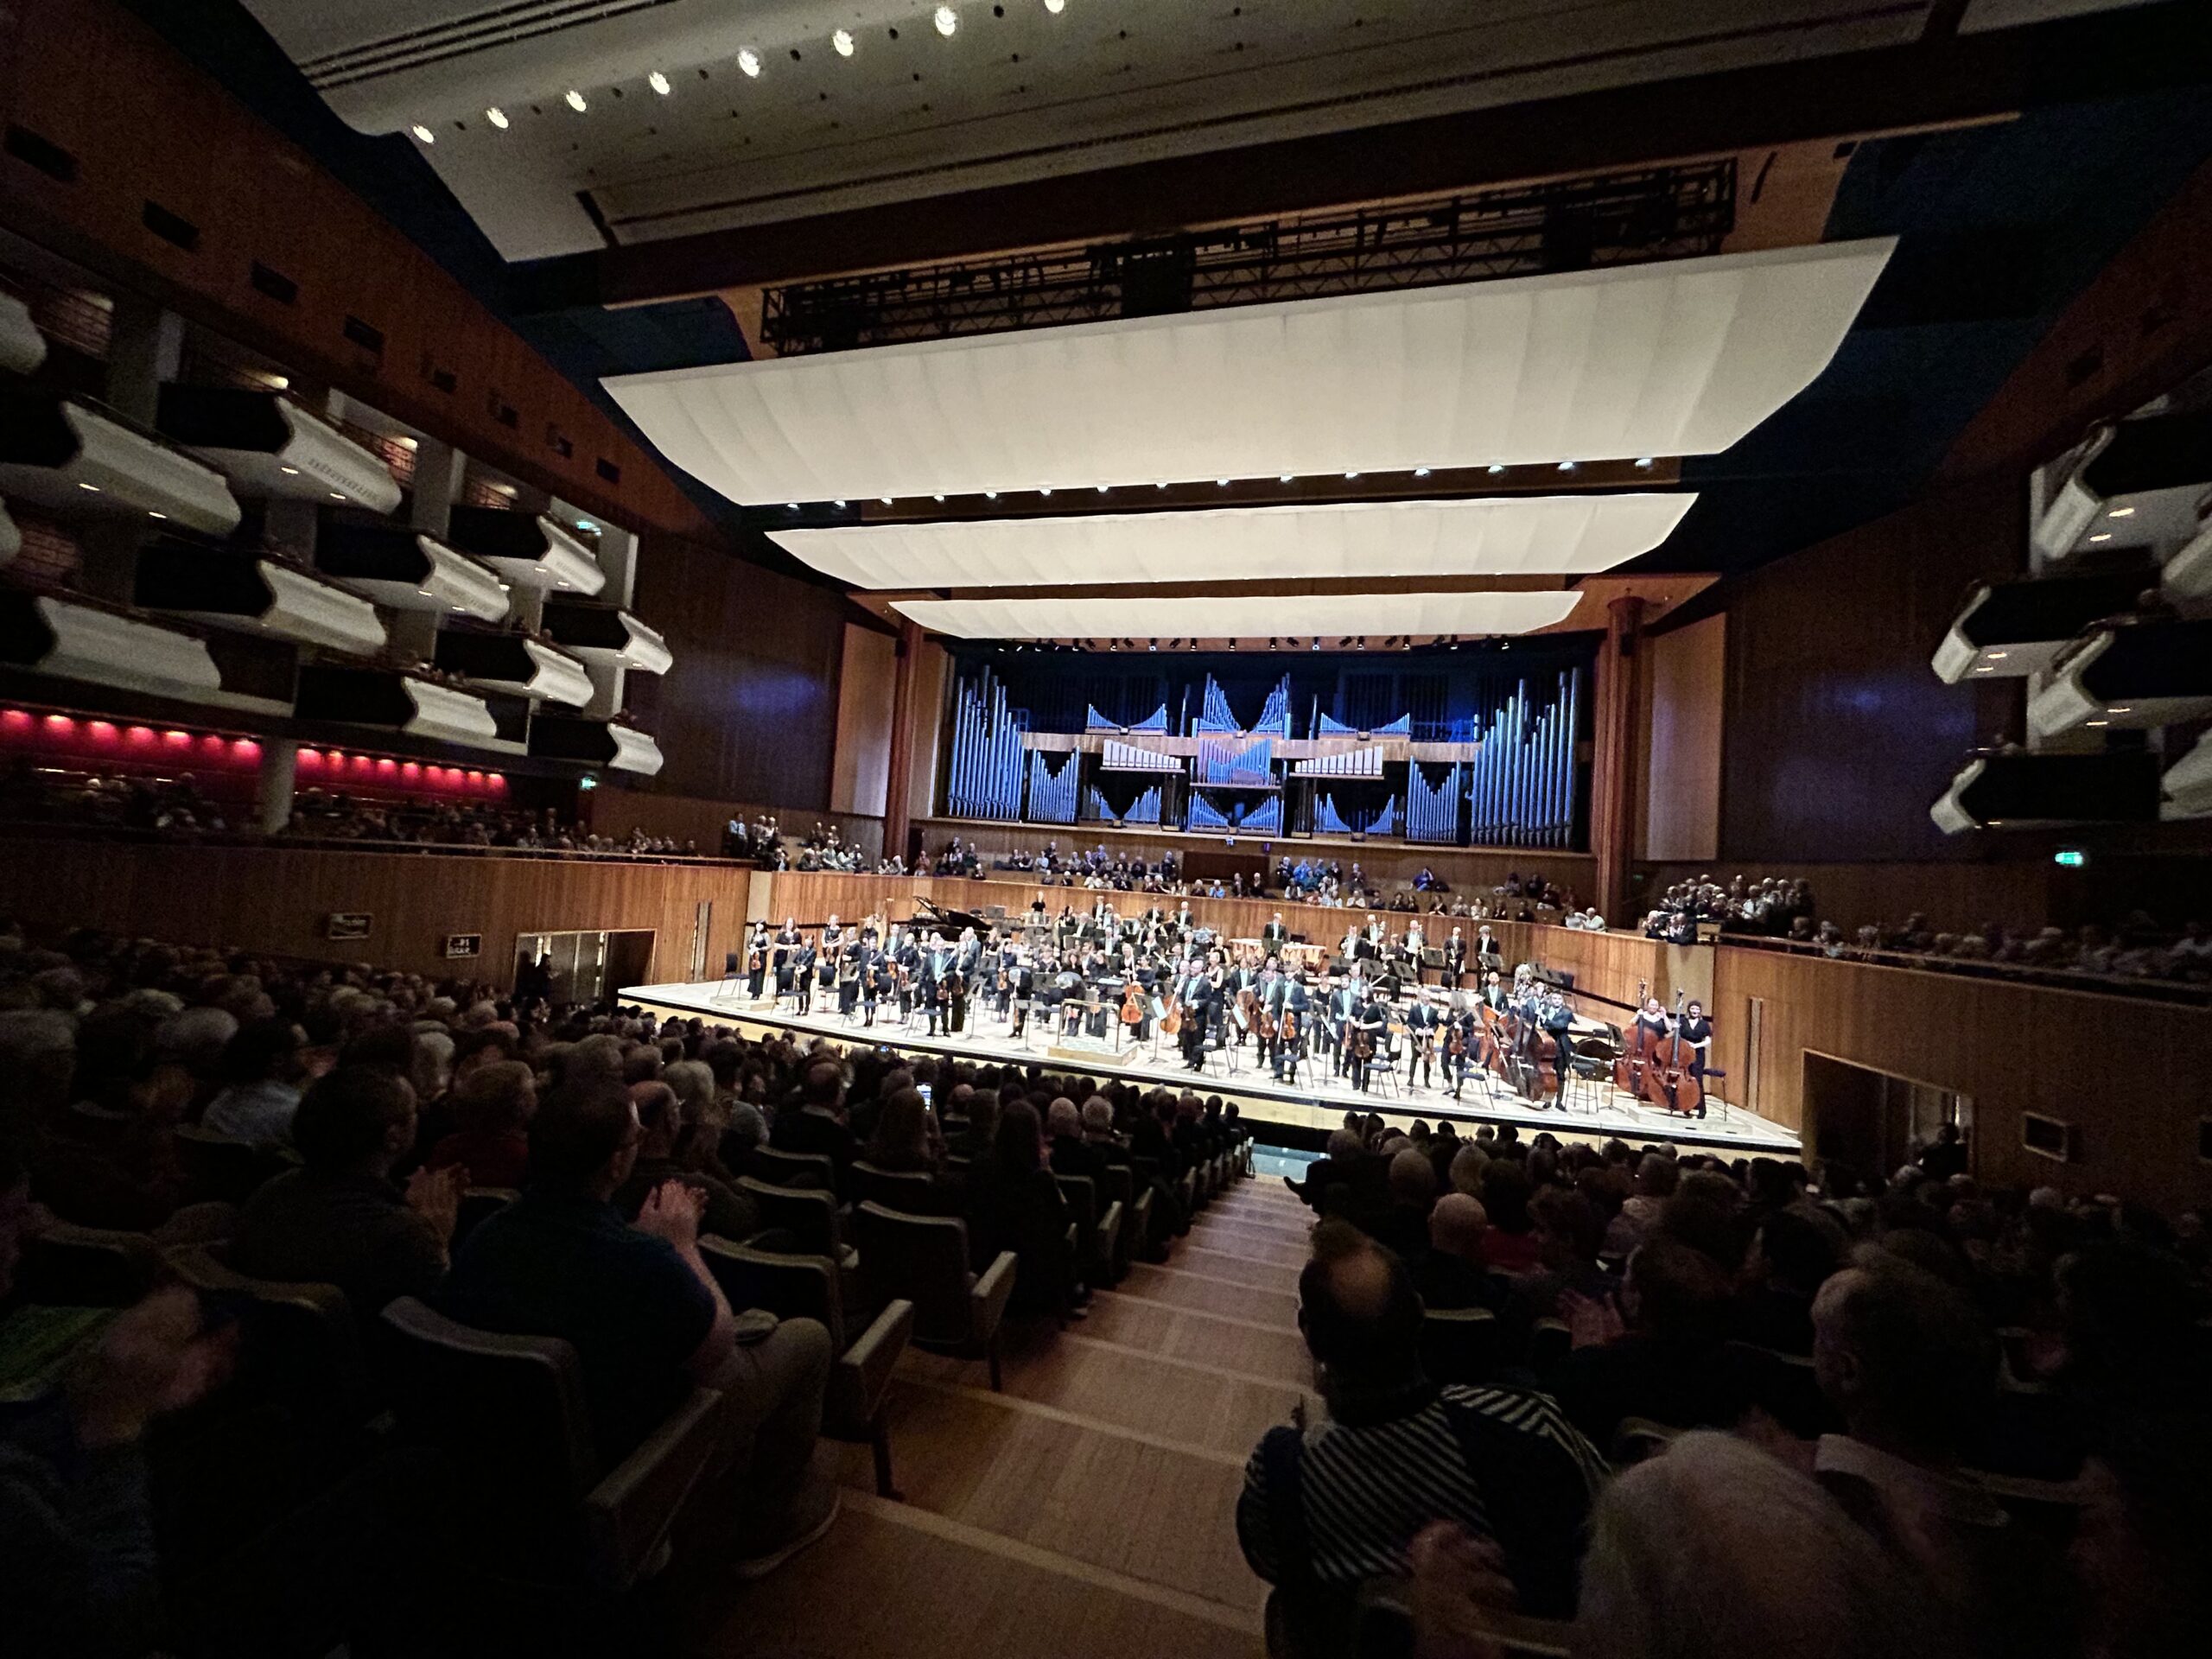 Interior of the Royal Festival Hall with an orchestra on stage and people sat in darkness in the auditorium.